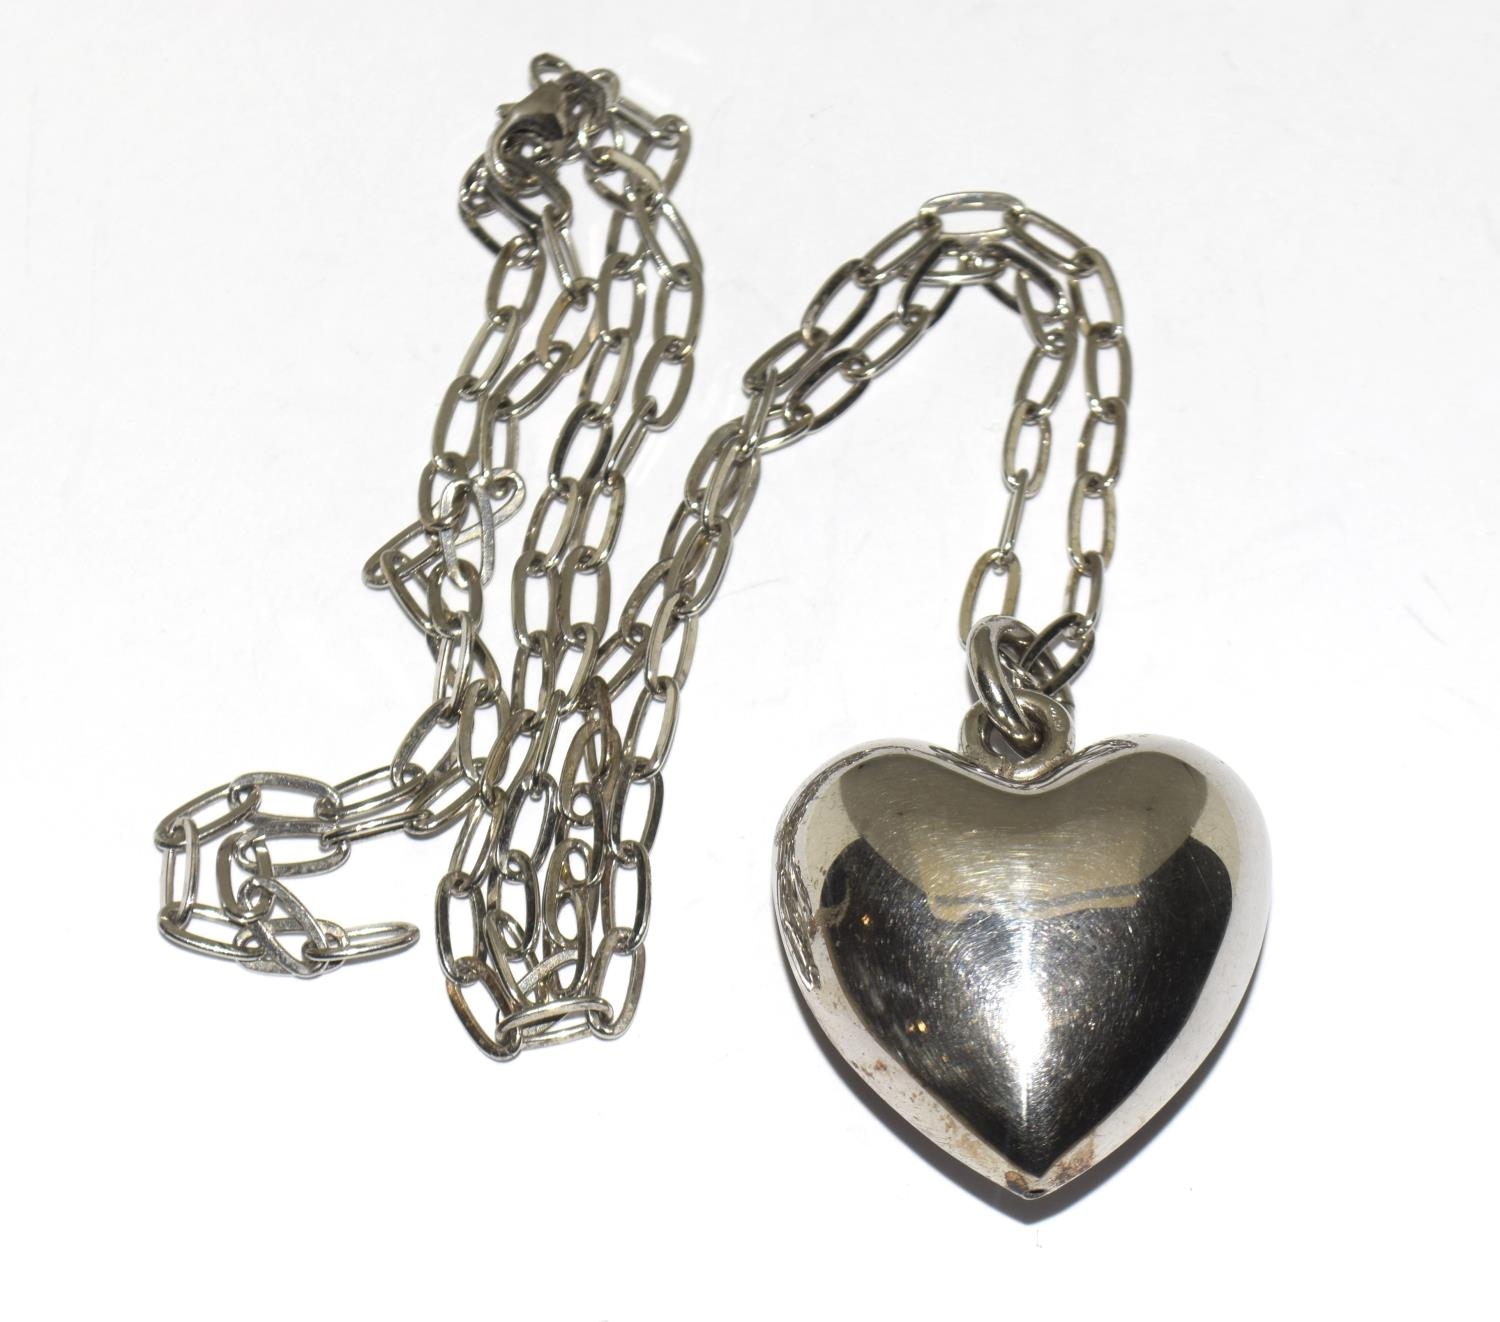 Large 925 silver puffy heart pendant on long chain.